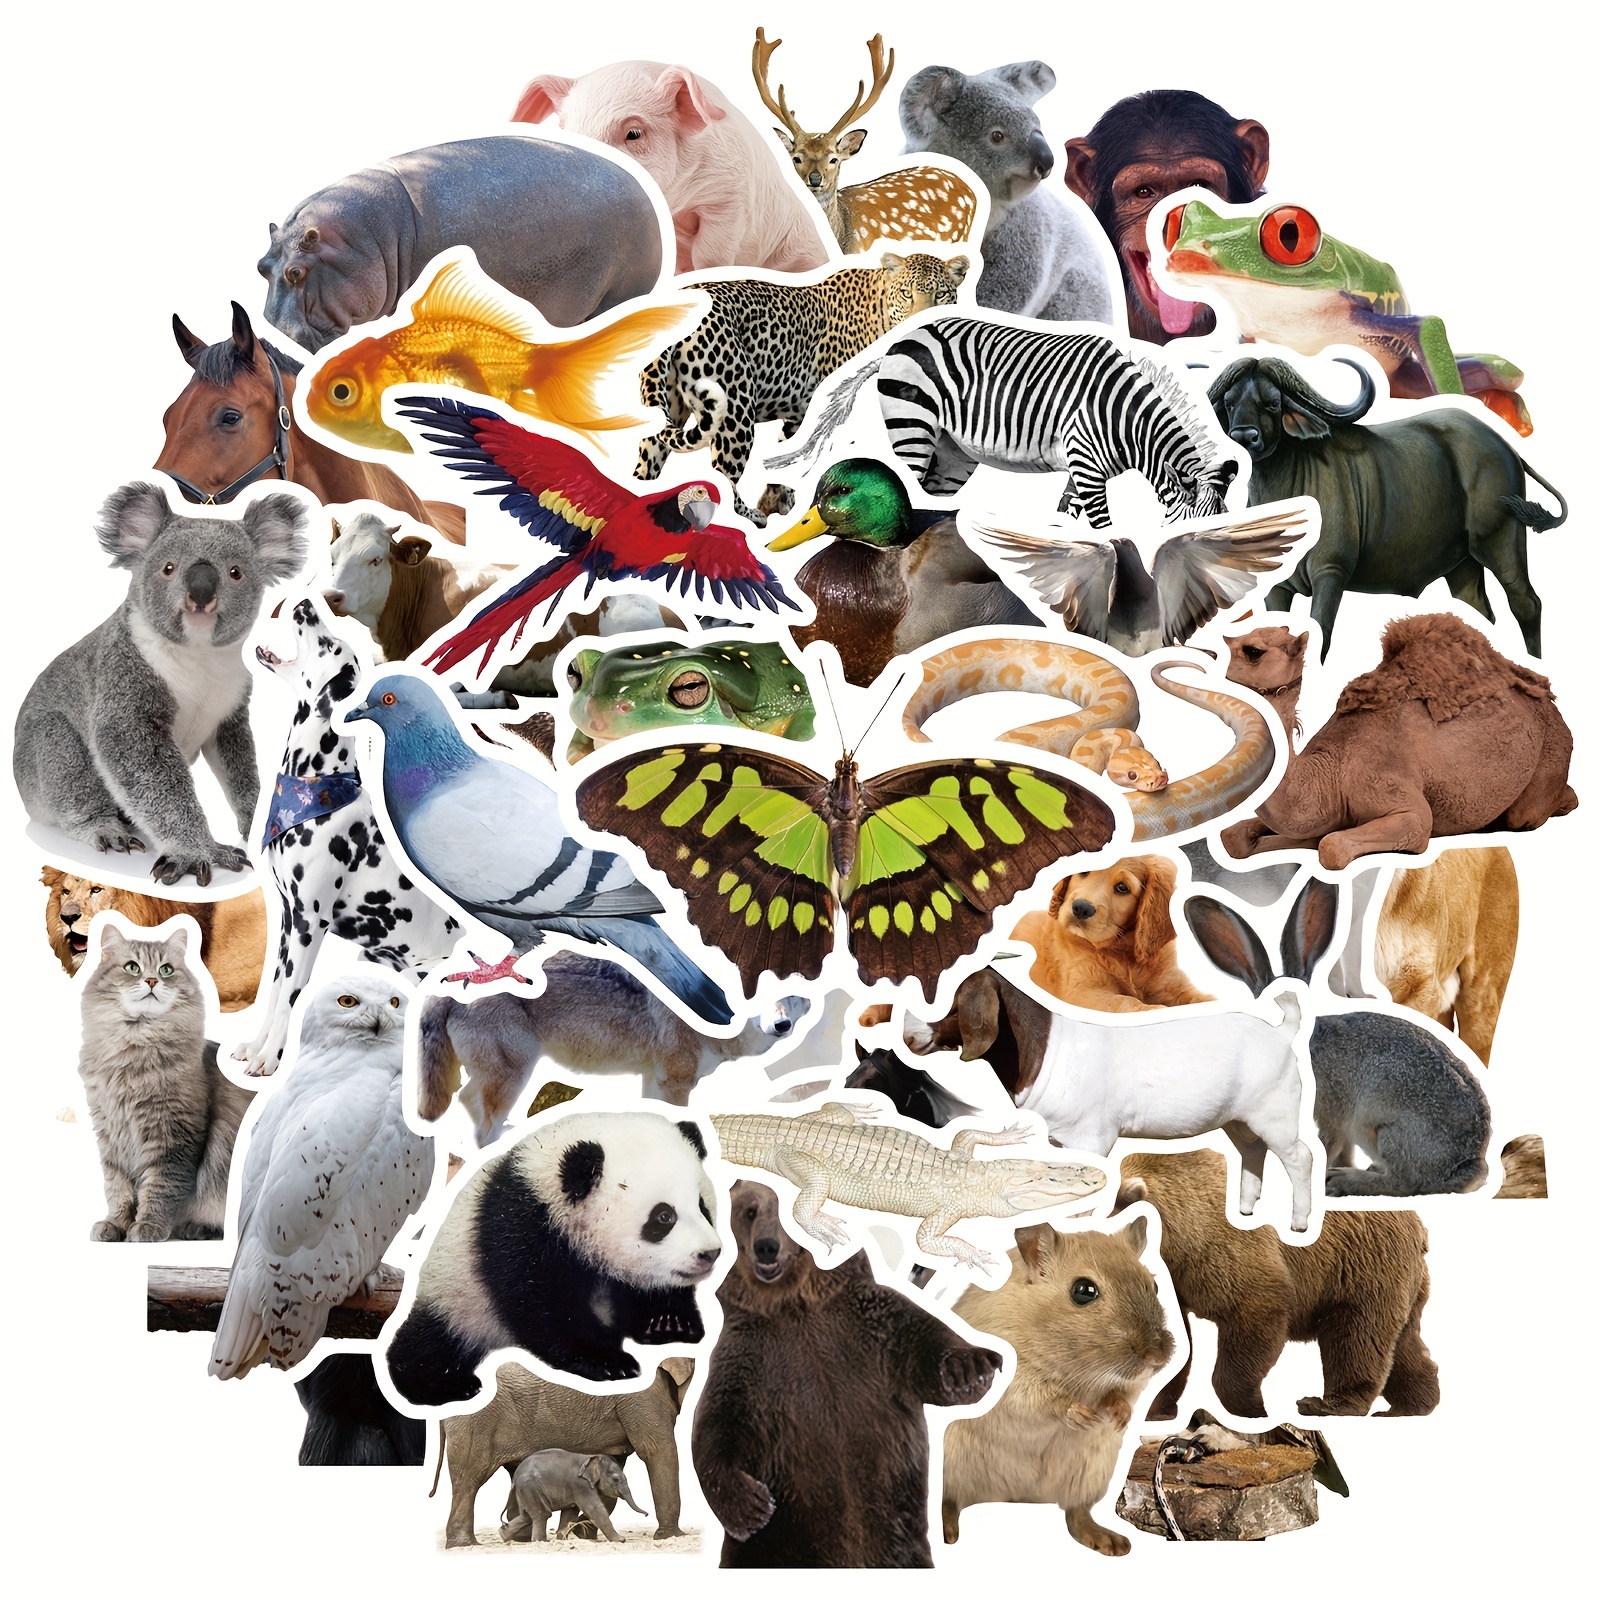 160PCS Animal Stickers for Kids, Cute Rainforest Zoo Animals